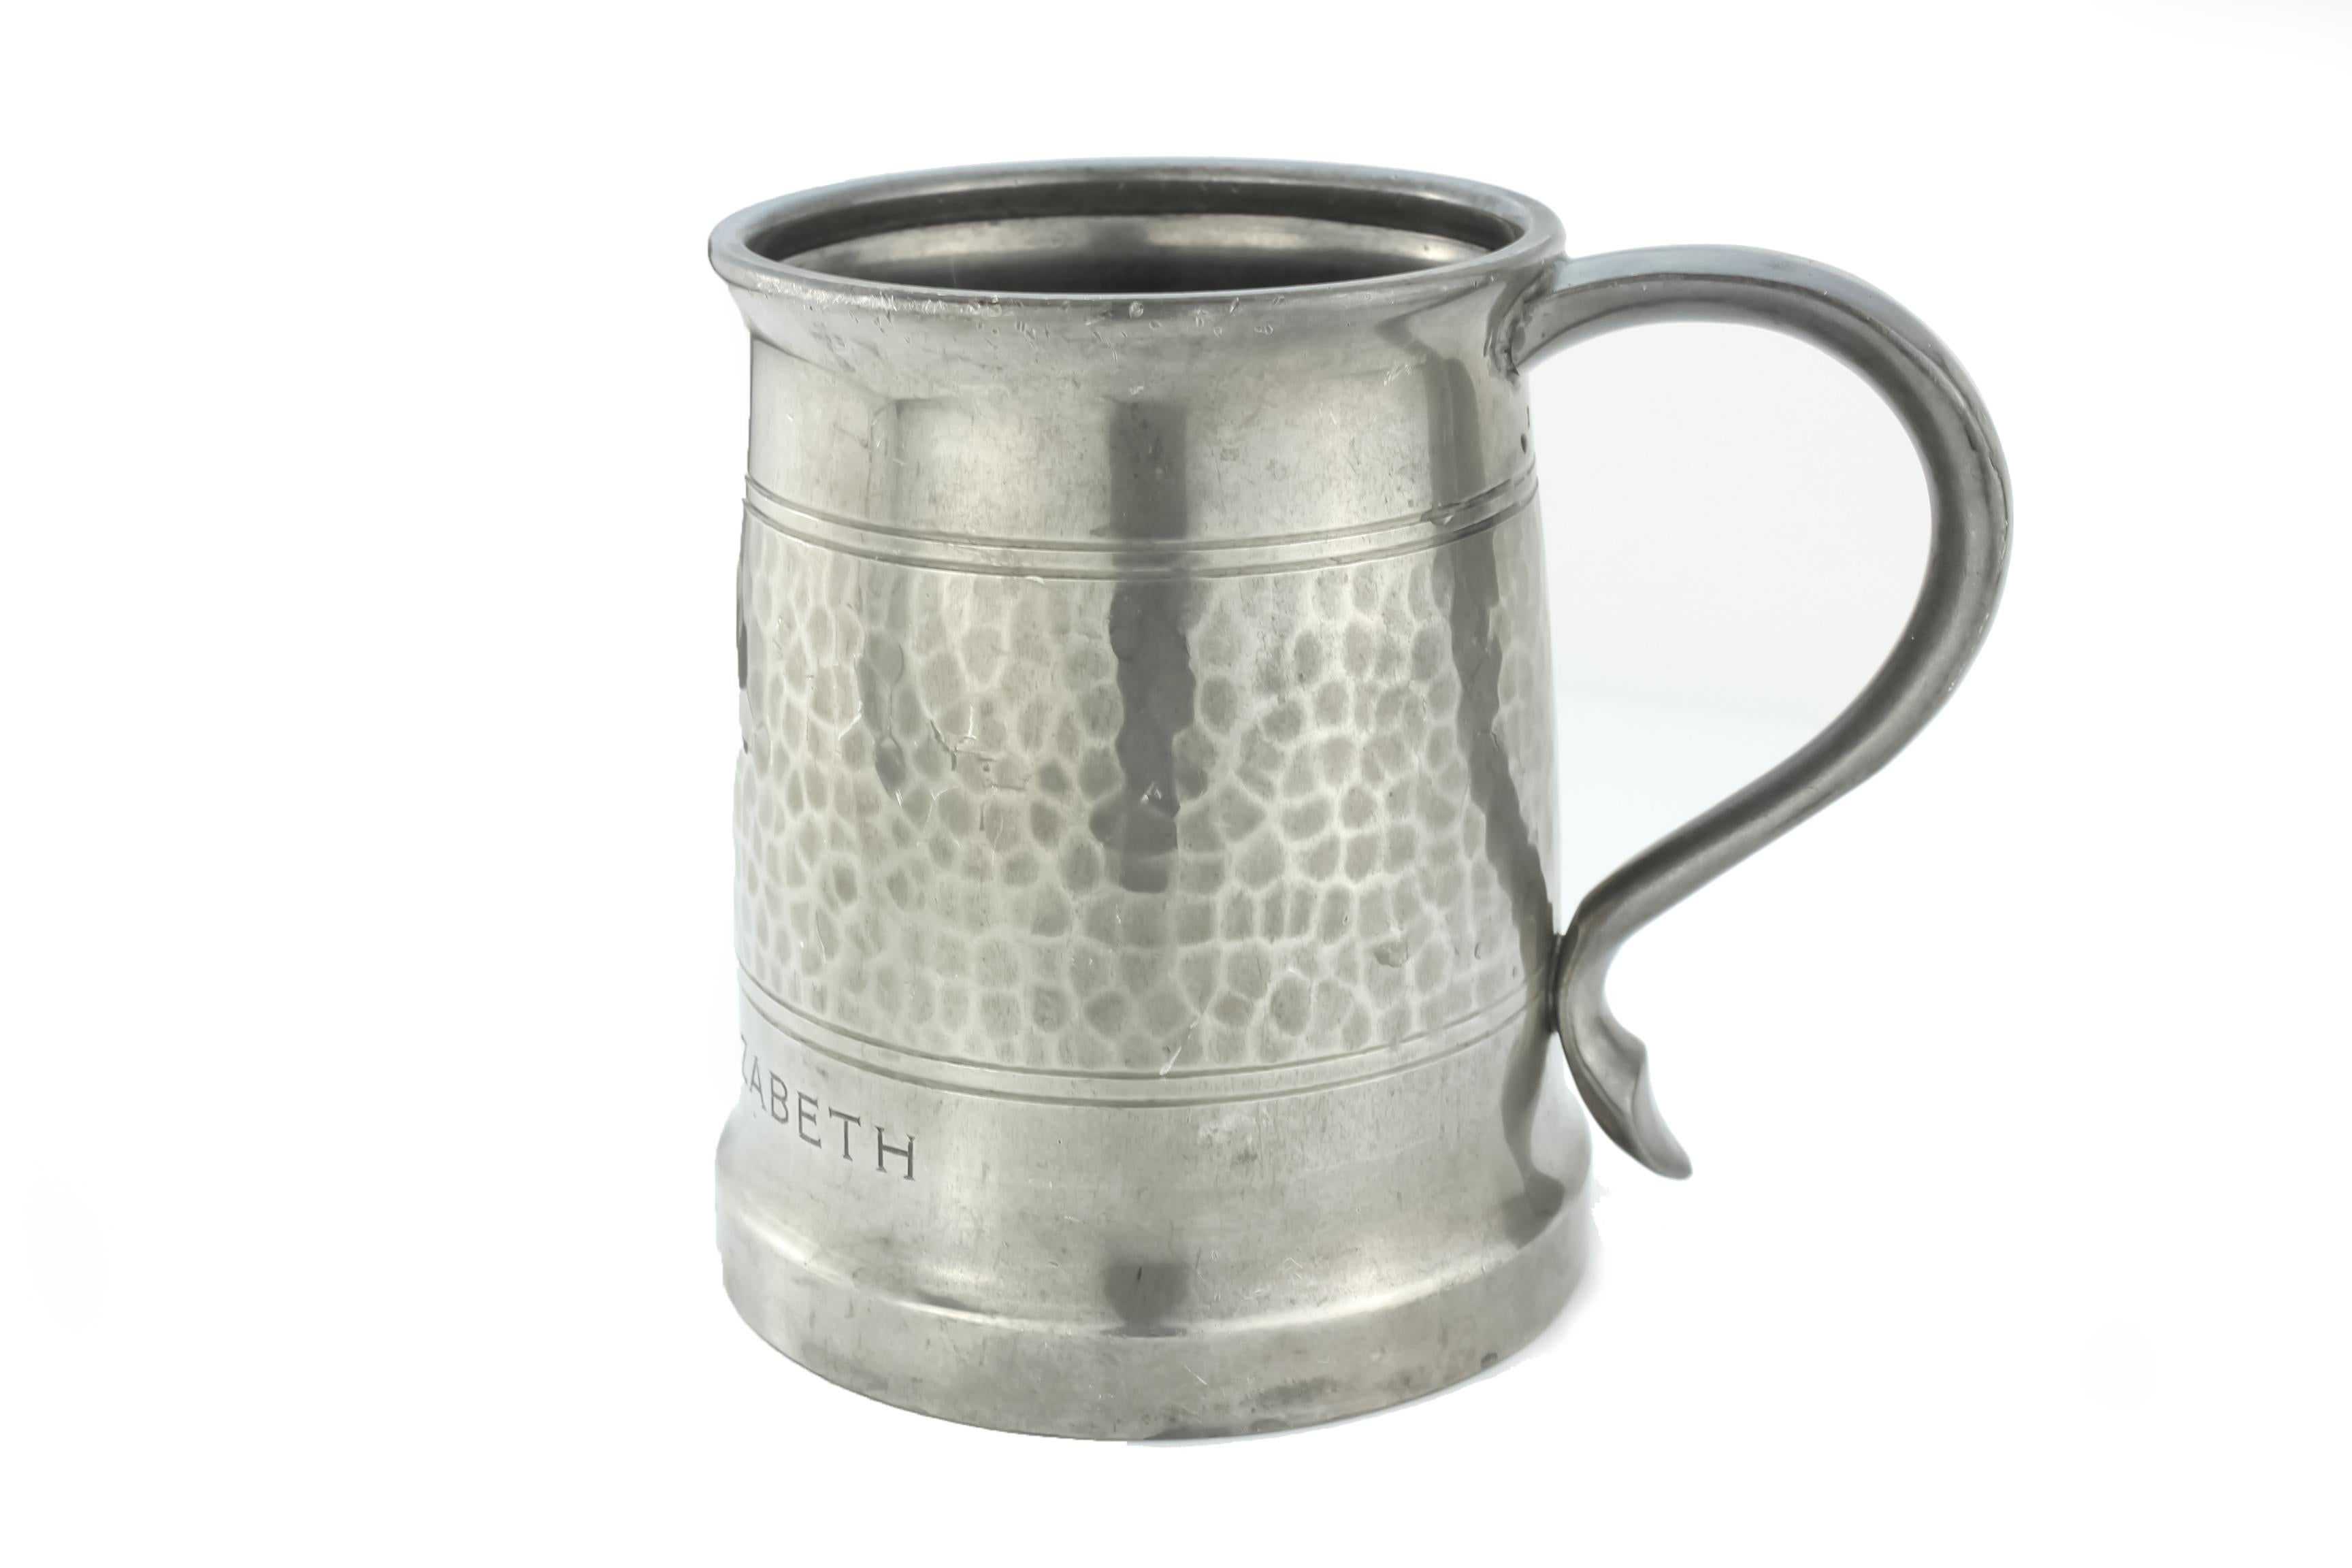 Liberty Tudric Pewter tankard made for RMS Queen Elizabeth Ship, 1938